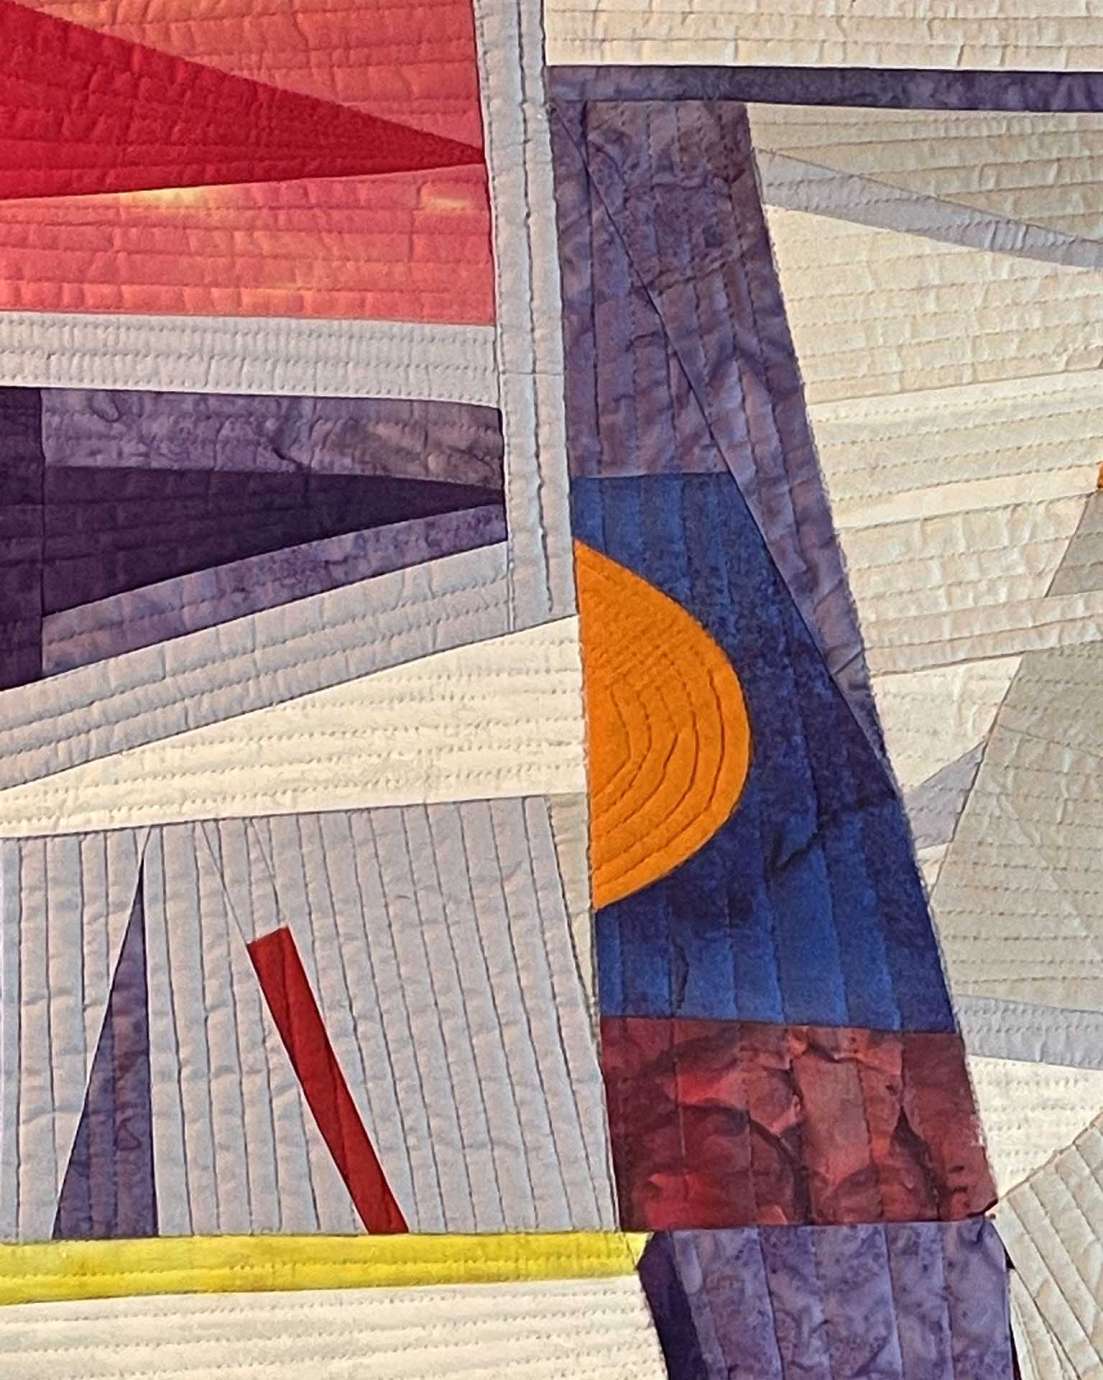 A quilt with blue, red, purple, gray, and yellow abstract lines, triangles, rectangles and a bright orange half circle.